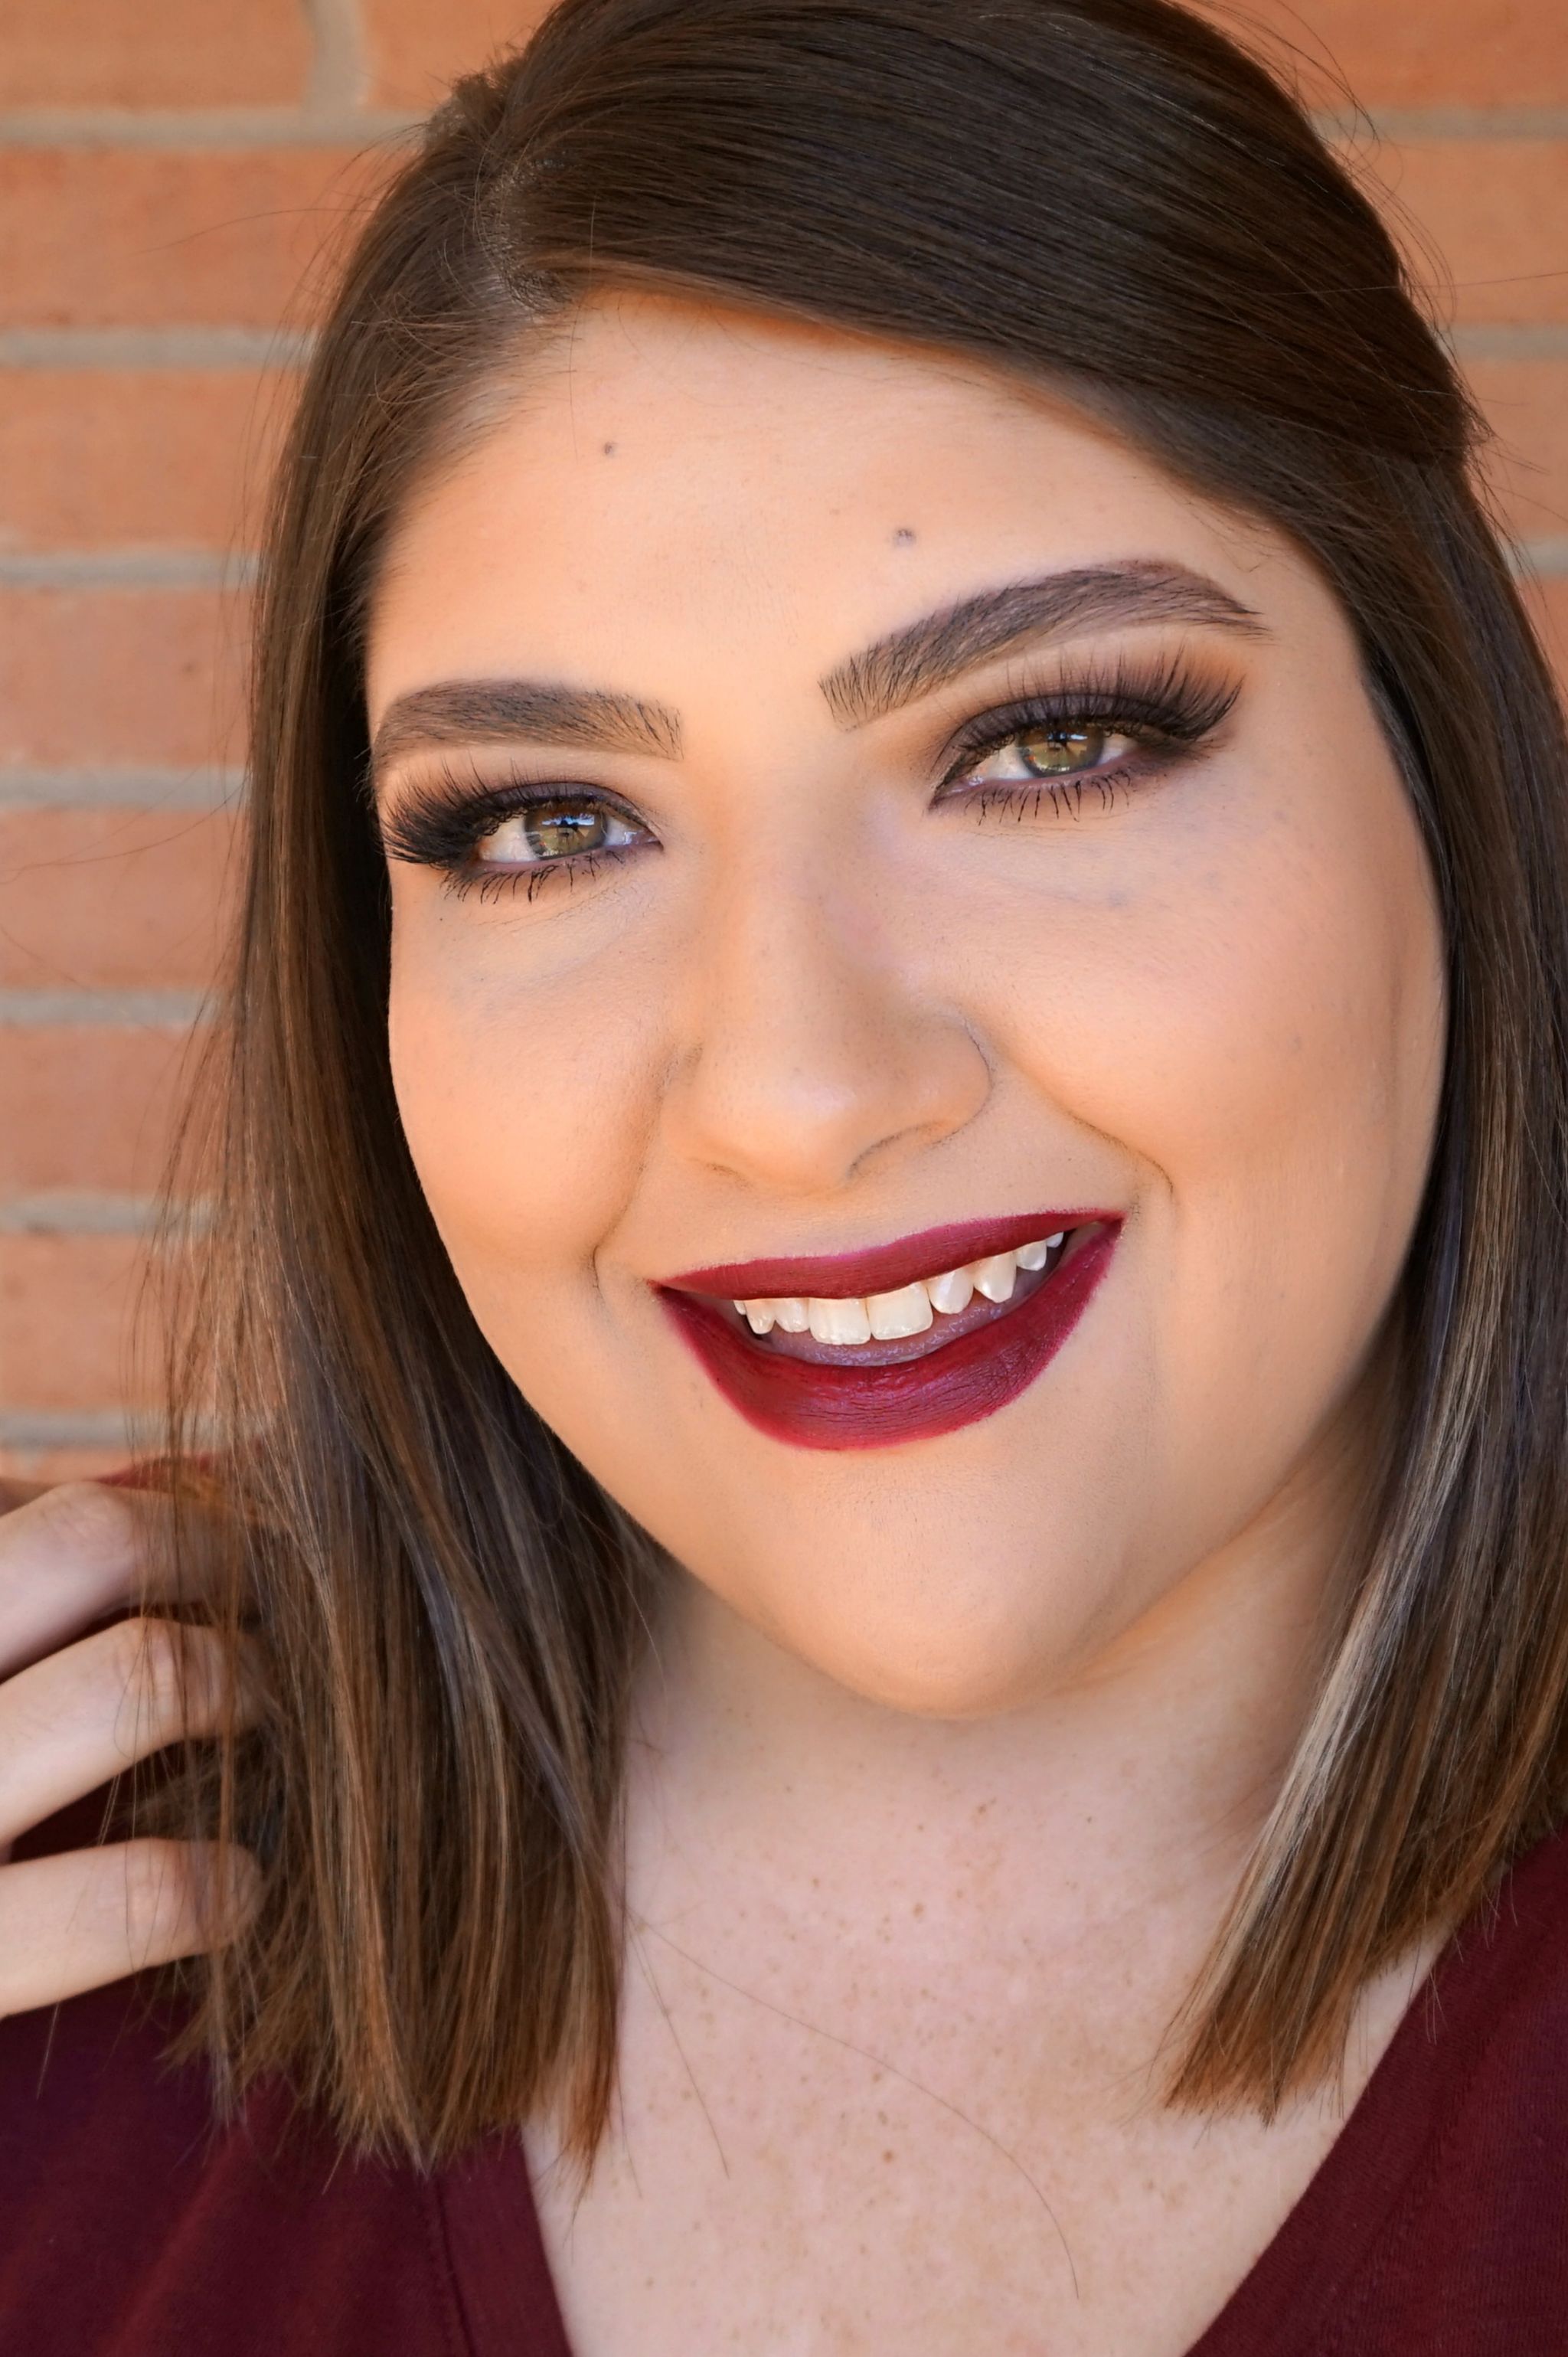 Easy Bold Makeup Look | Beauty With Lily, A West Texas Beauty, Fashion & Lifestyle Blog